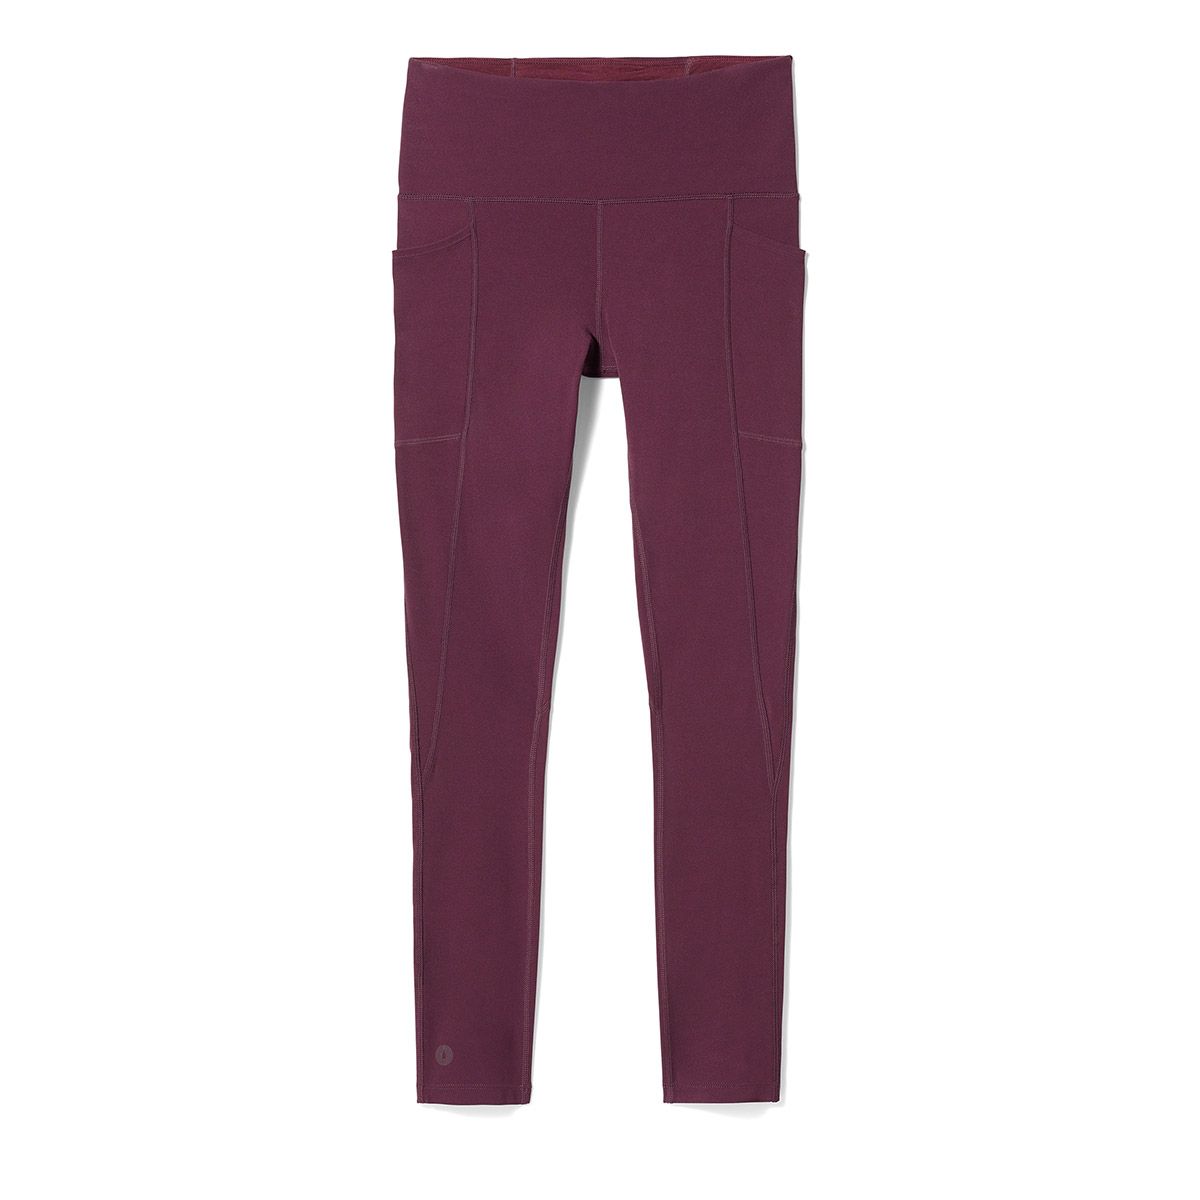 Pale Mauve Buttery Soft Leggings with Pockets – Wild Harmony Boutique